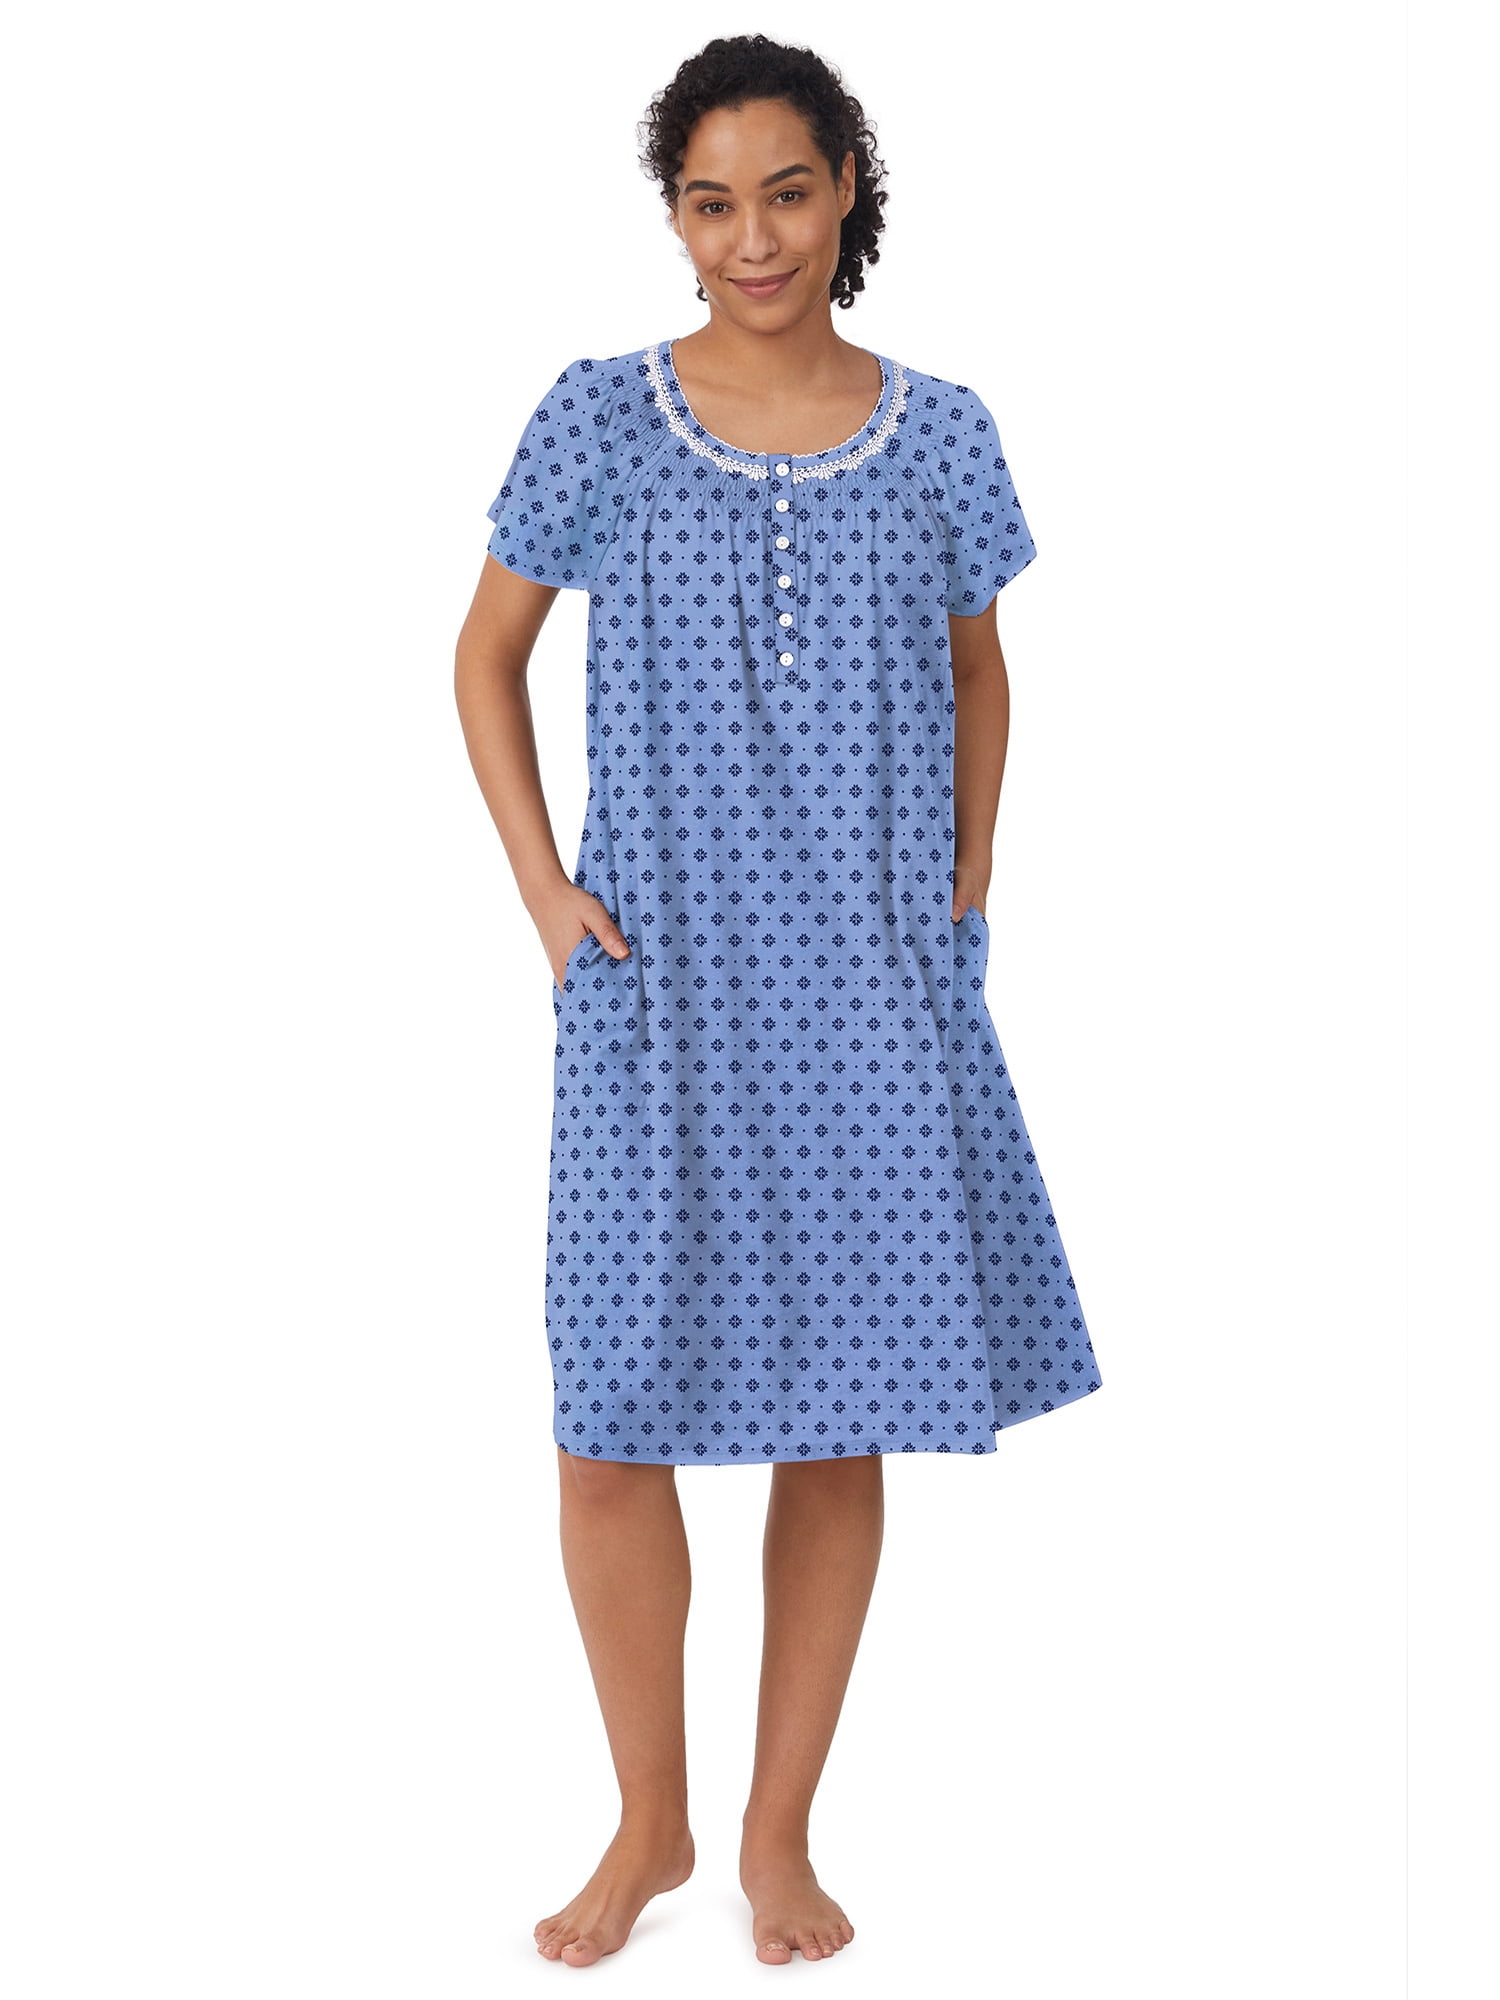 Aria Nightgown with Pockets (Women and Women's Plus) - Walmart.com